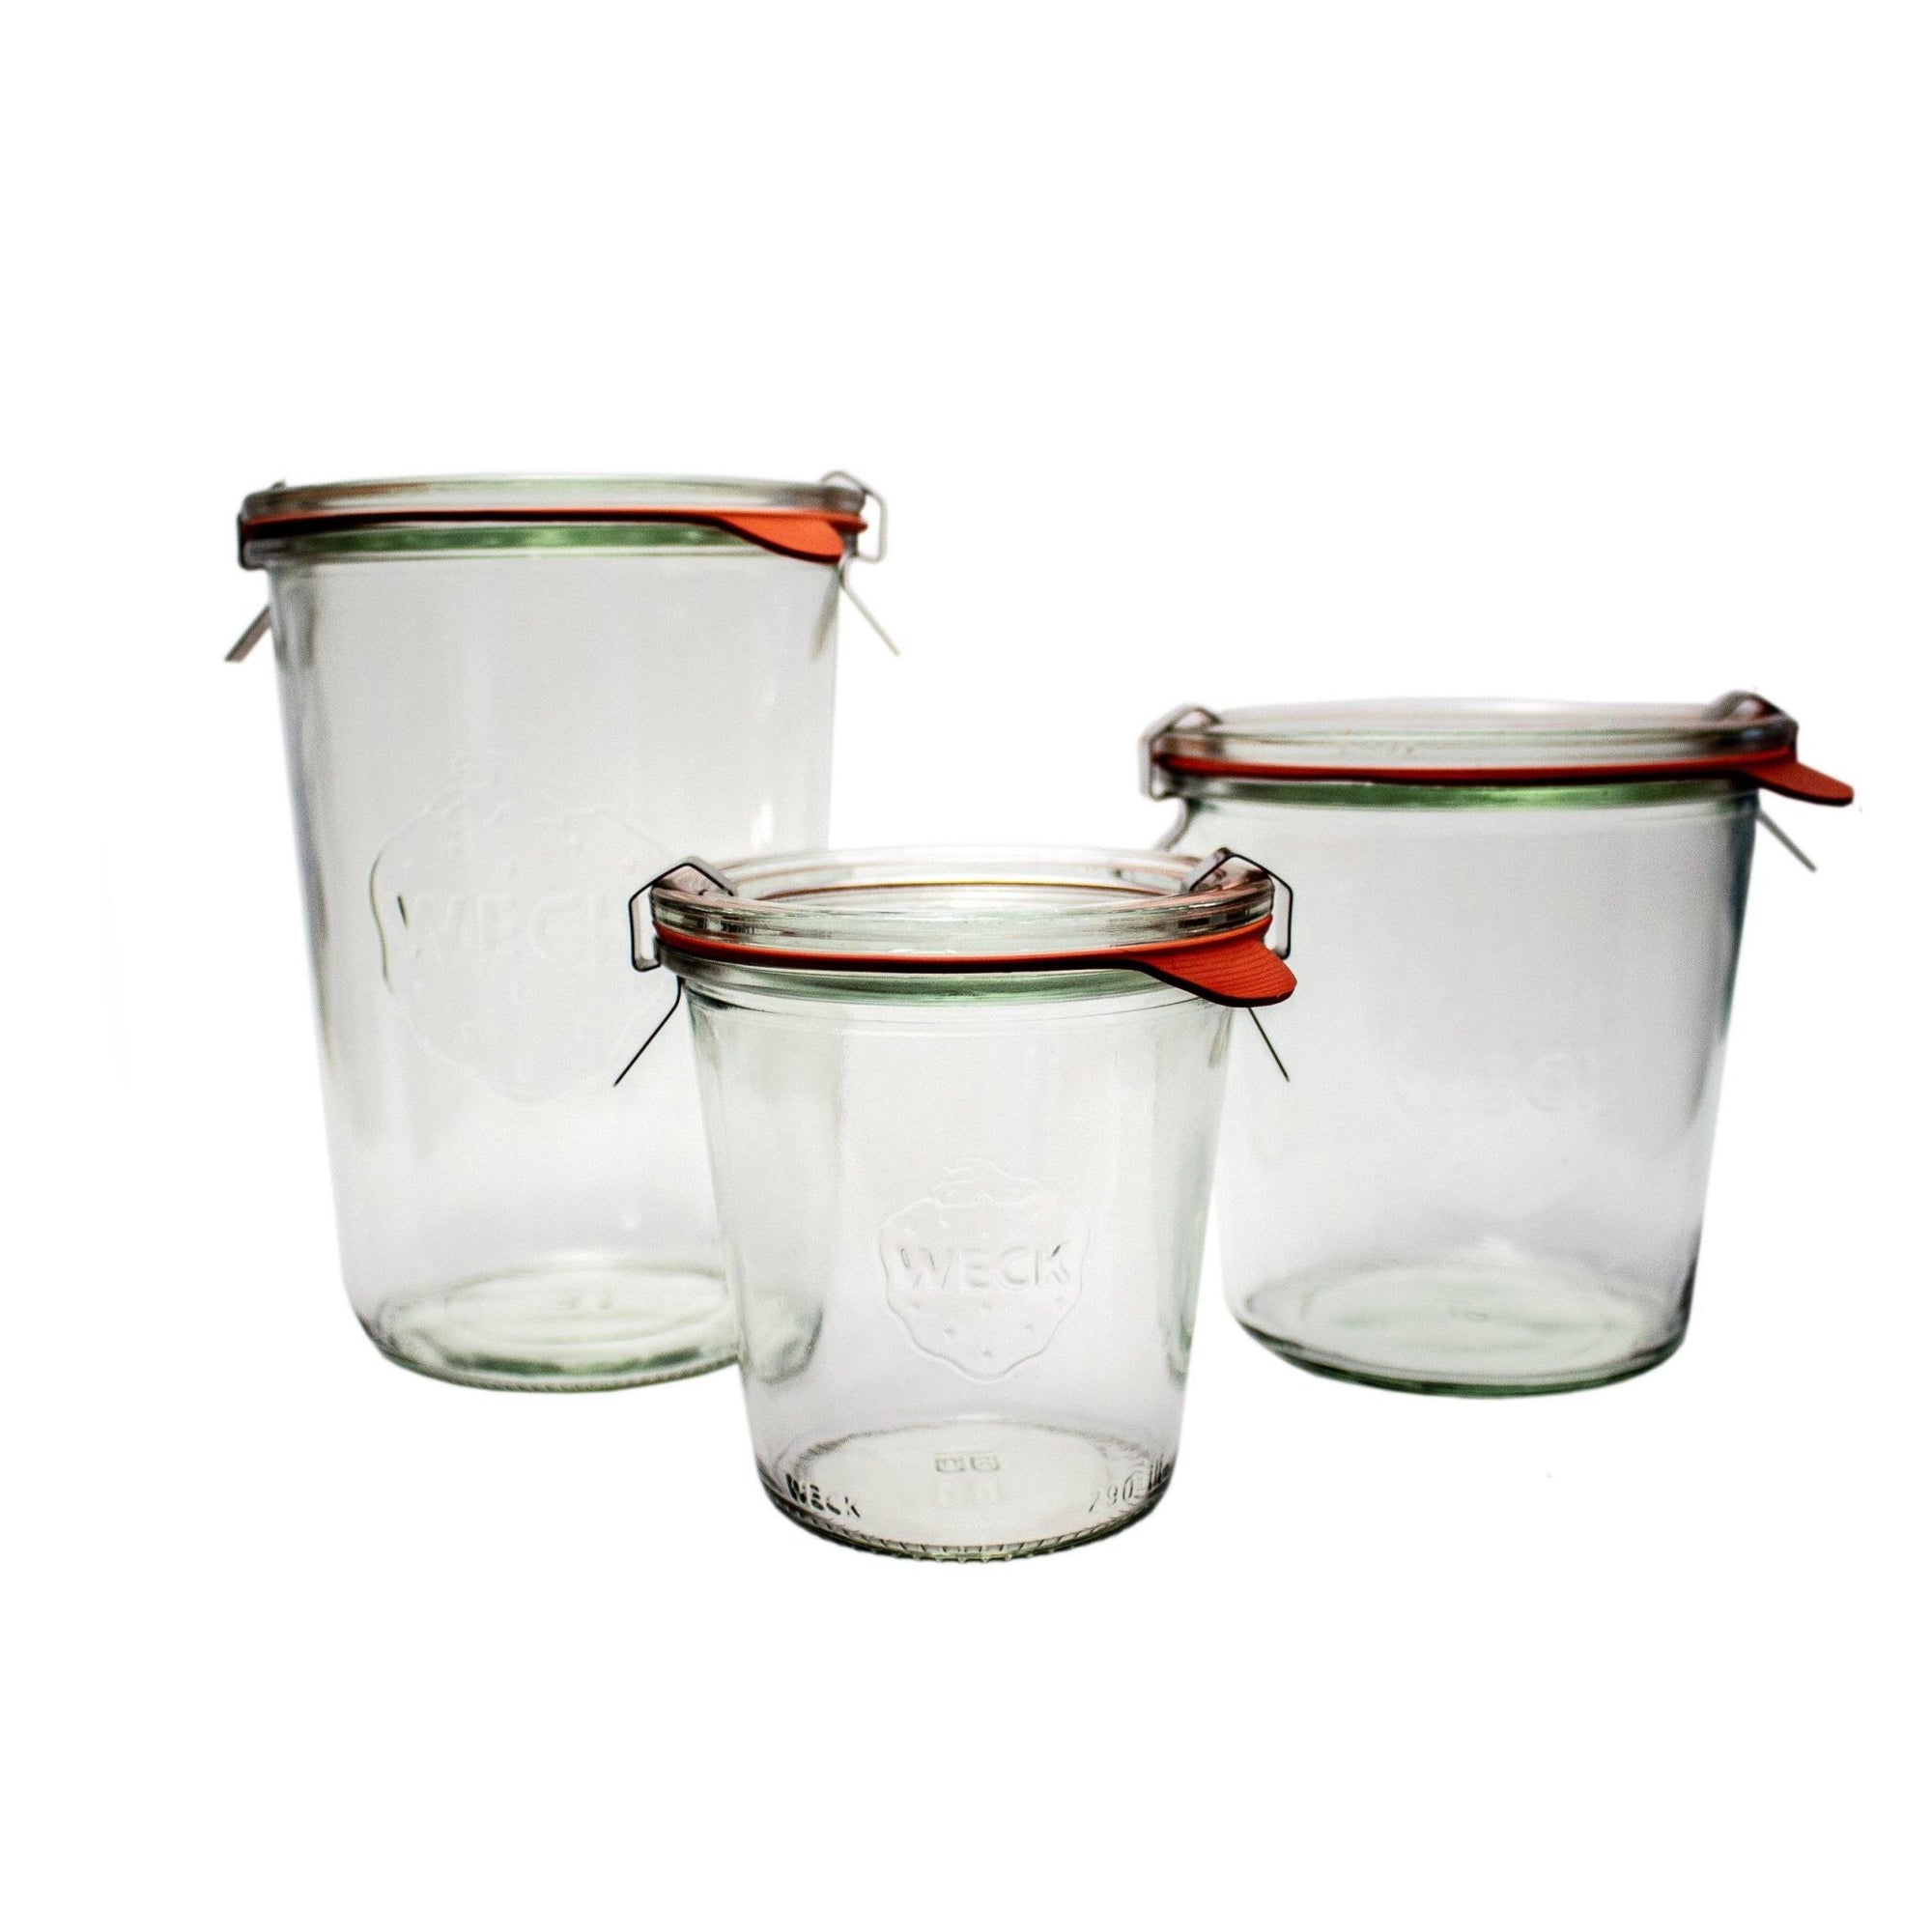 Weck Mold Jar Combo Pack    at Boston General Store